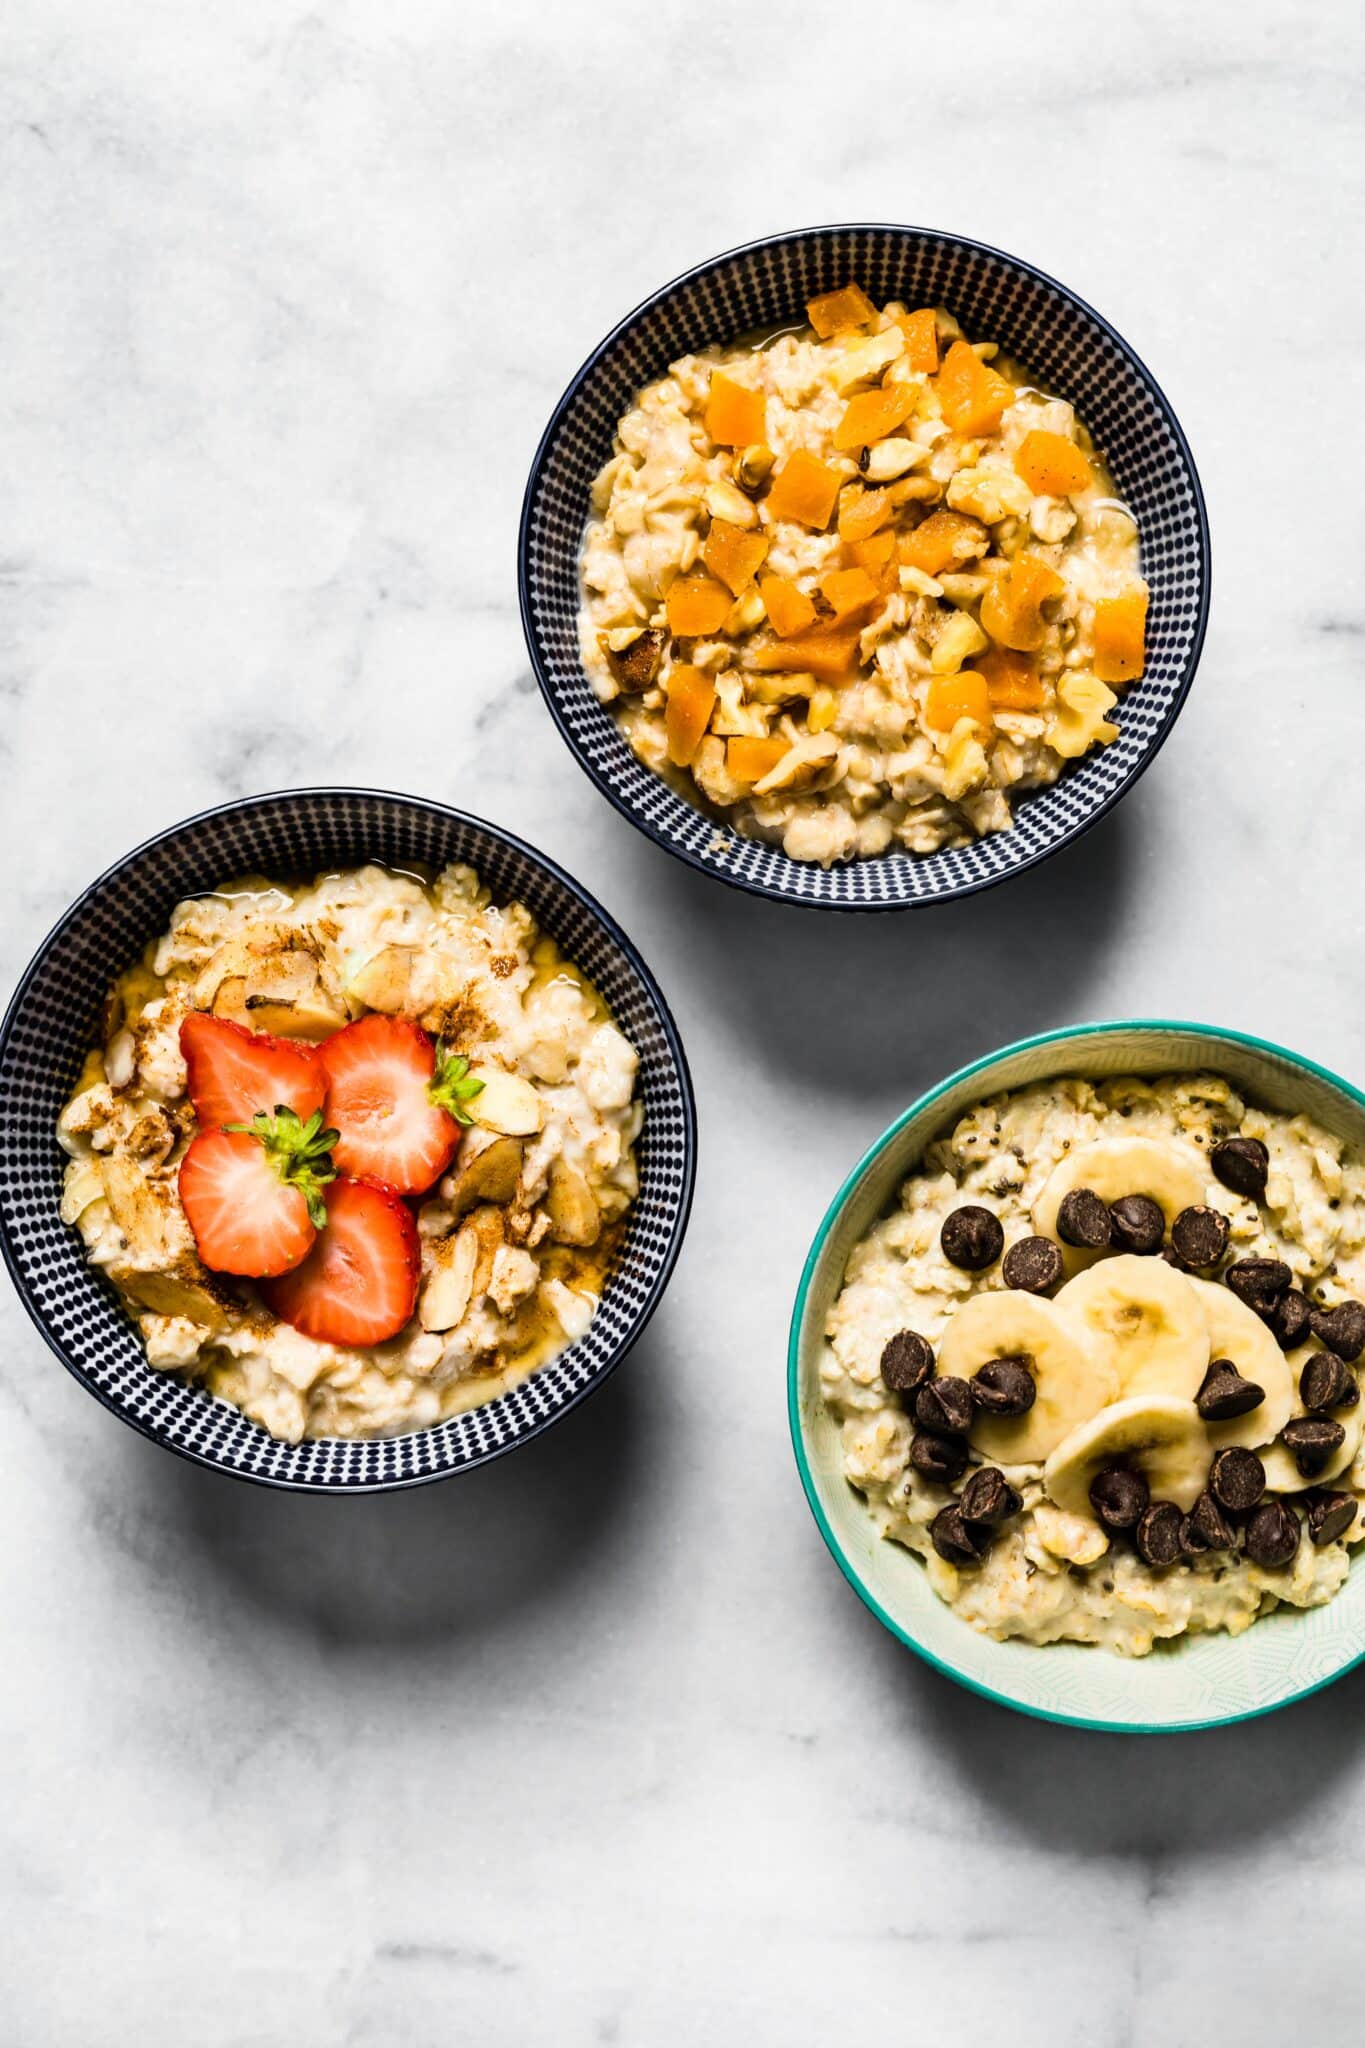 Three bowls of gluten free high protein oatmeal with fresh fruit or chocolate chips.